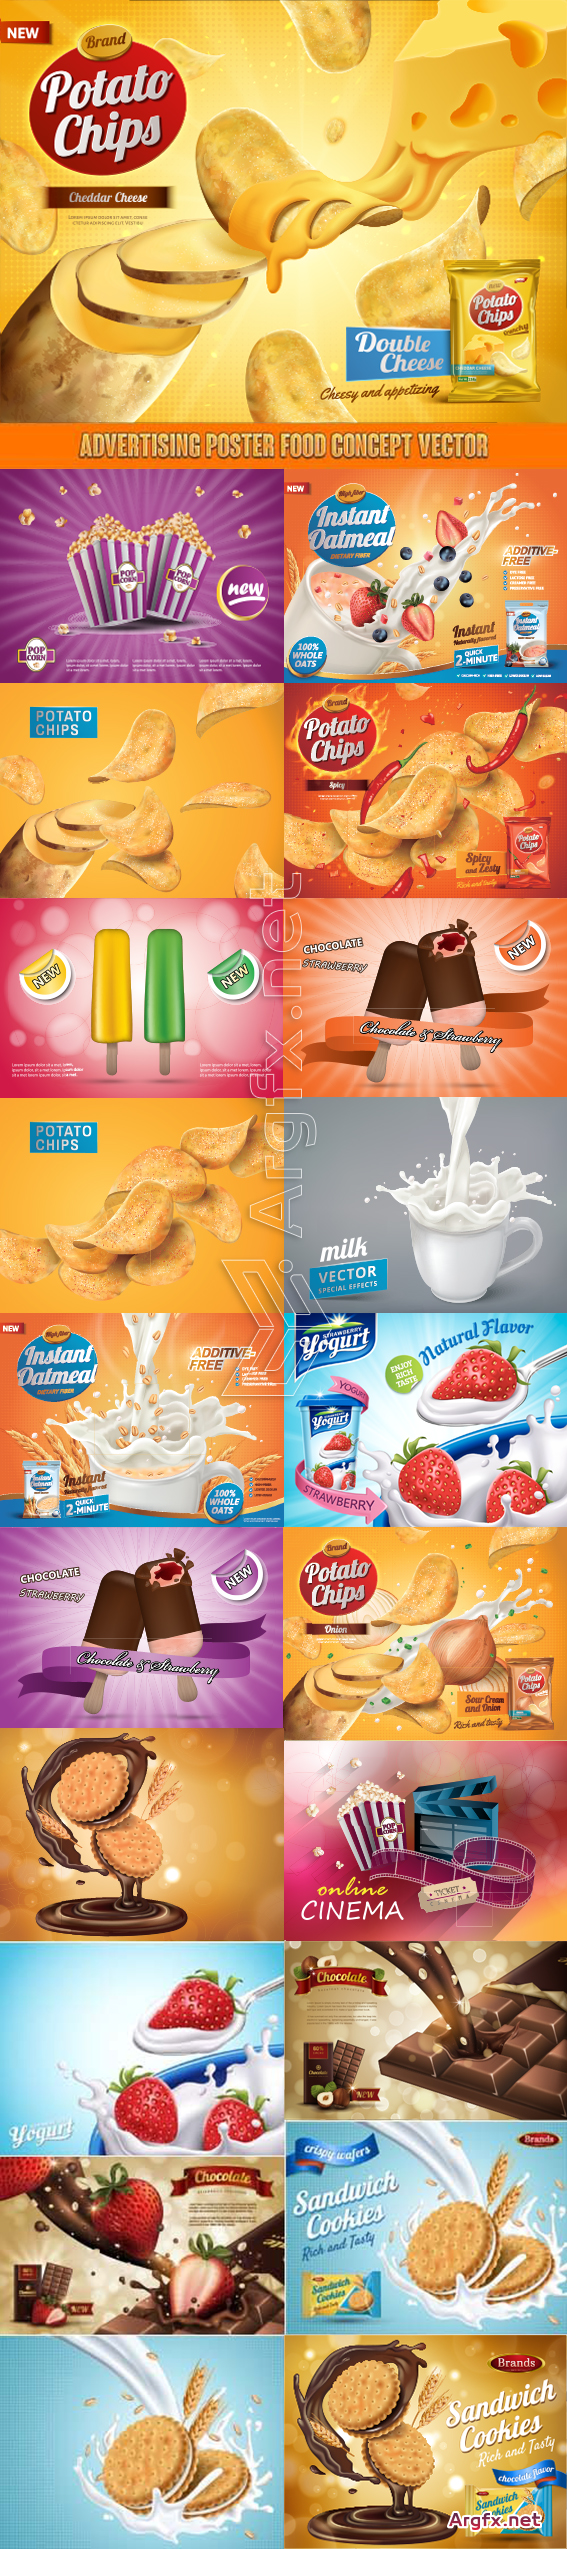 Advertising Poster Food Concept vector